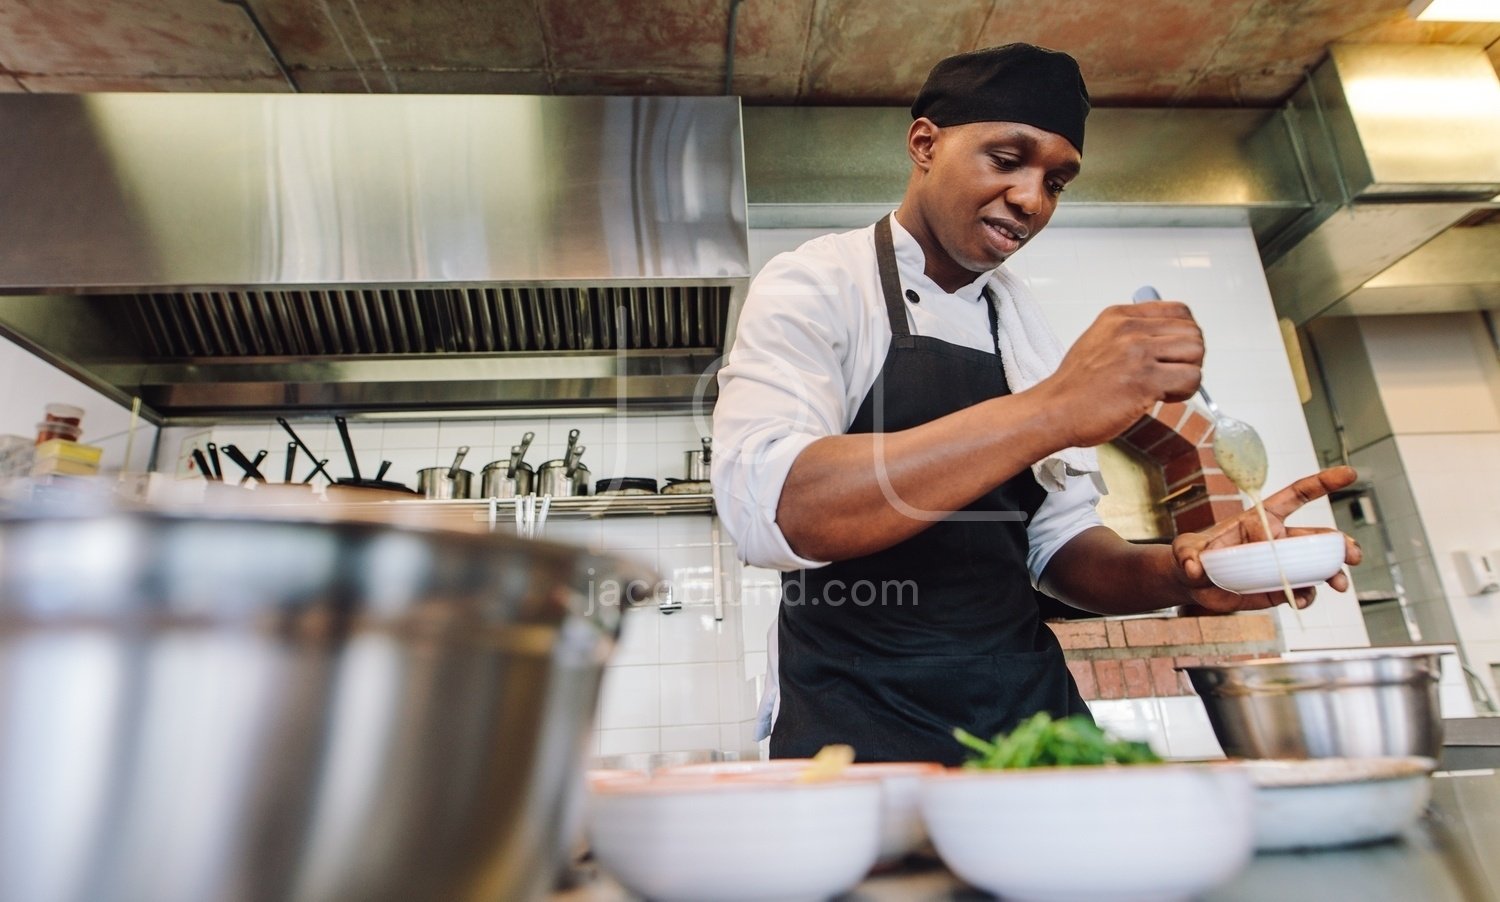 Gourmet chef cooking in a commercial kitchen – Jacob Lund Photography  Store- premium stock photo